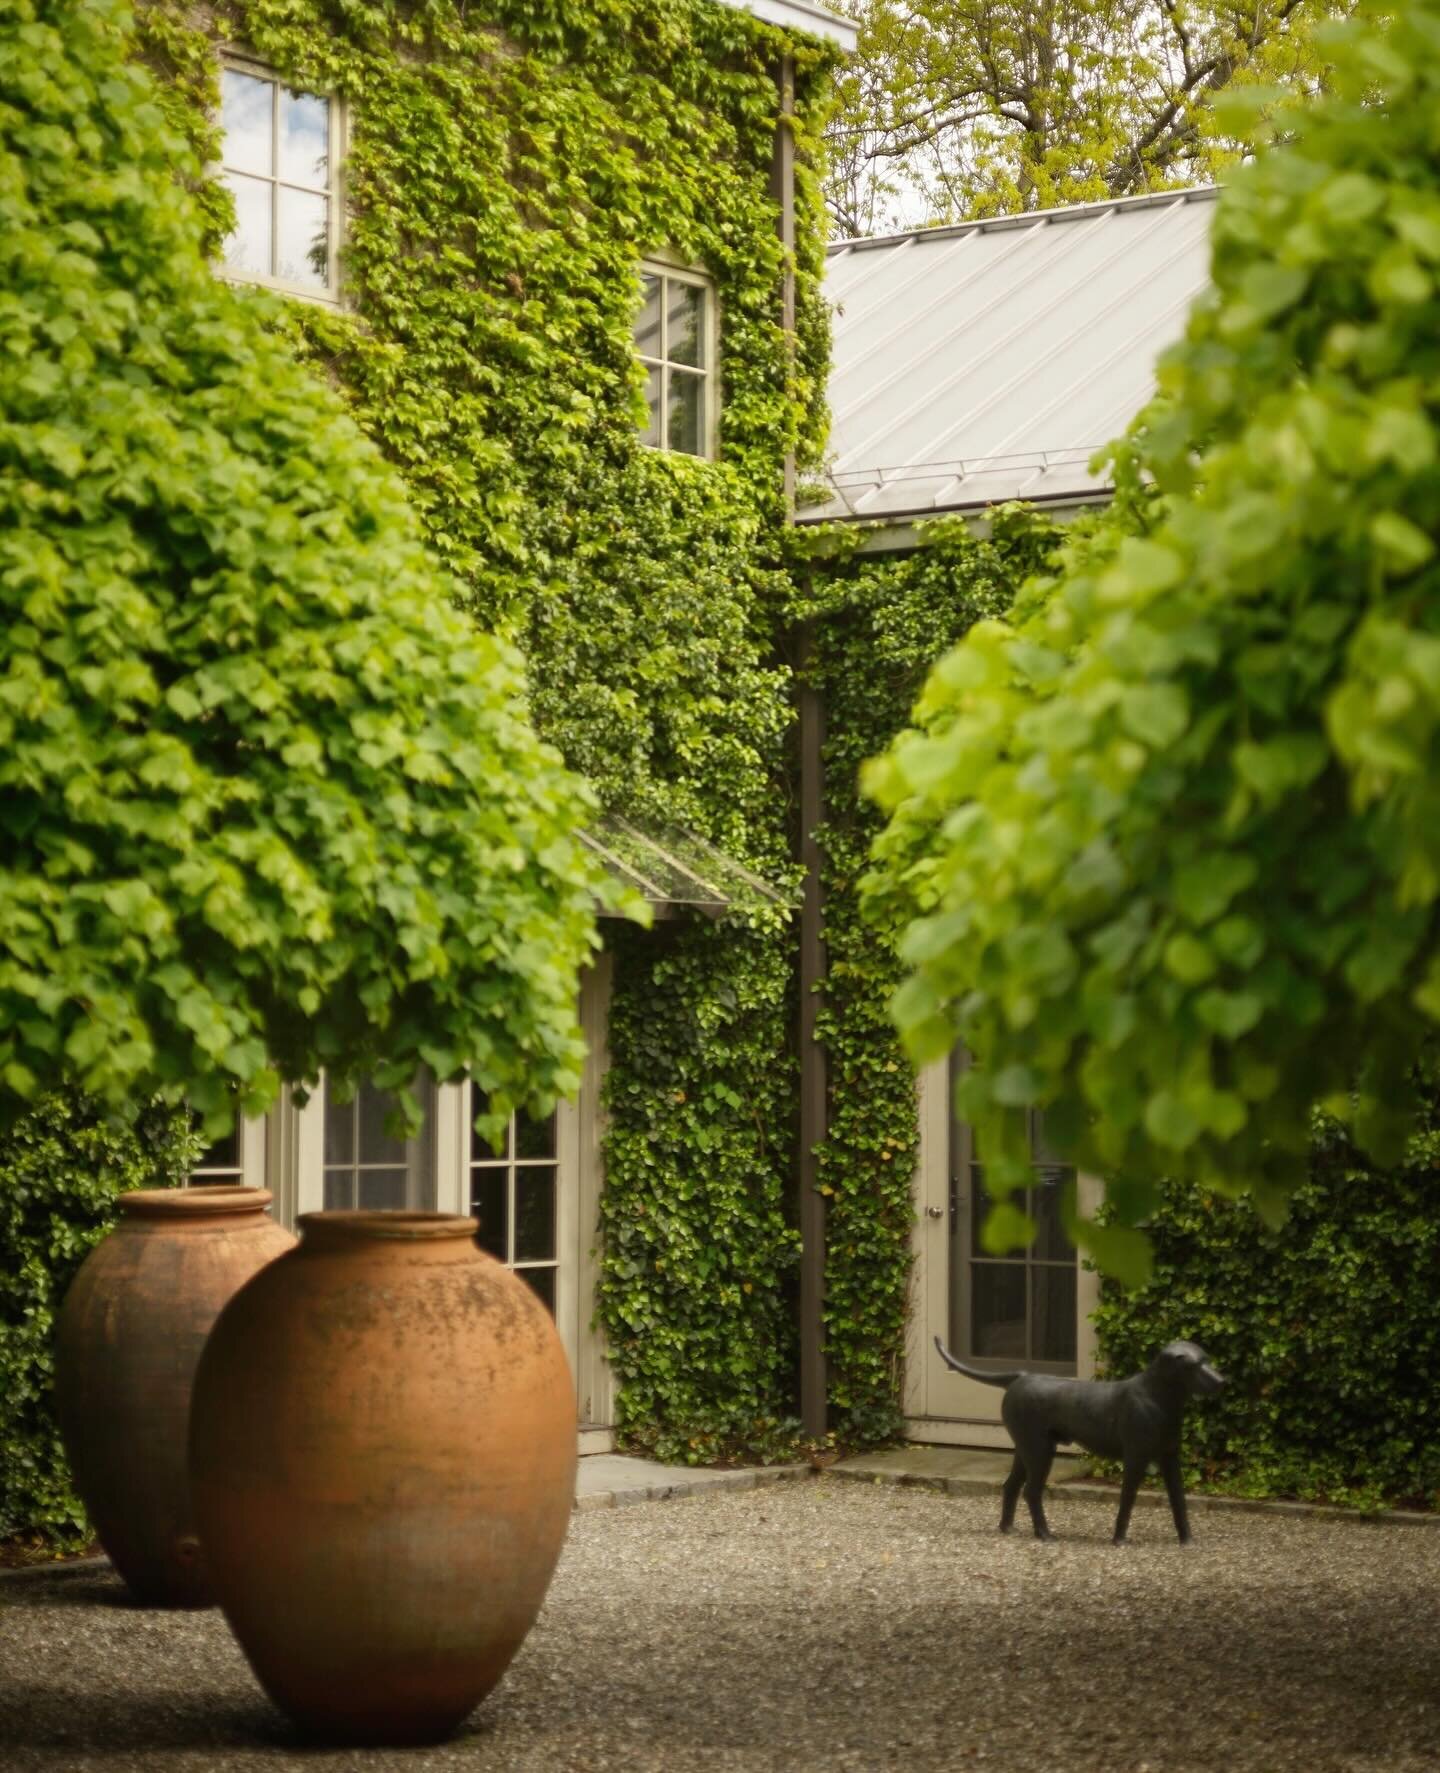 As we await the warmth of the Spring, we can&rsquo;t help but get inspired by the architecture and landscape design of the private residence of Keith Kroeger of the eponymous architectural studio @kroeger_intinarelli_architects We&rsquo;re thrilled t